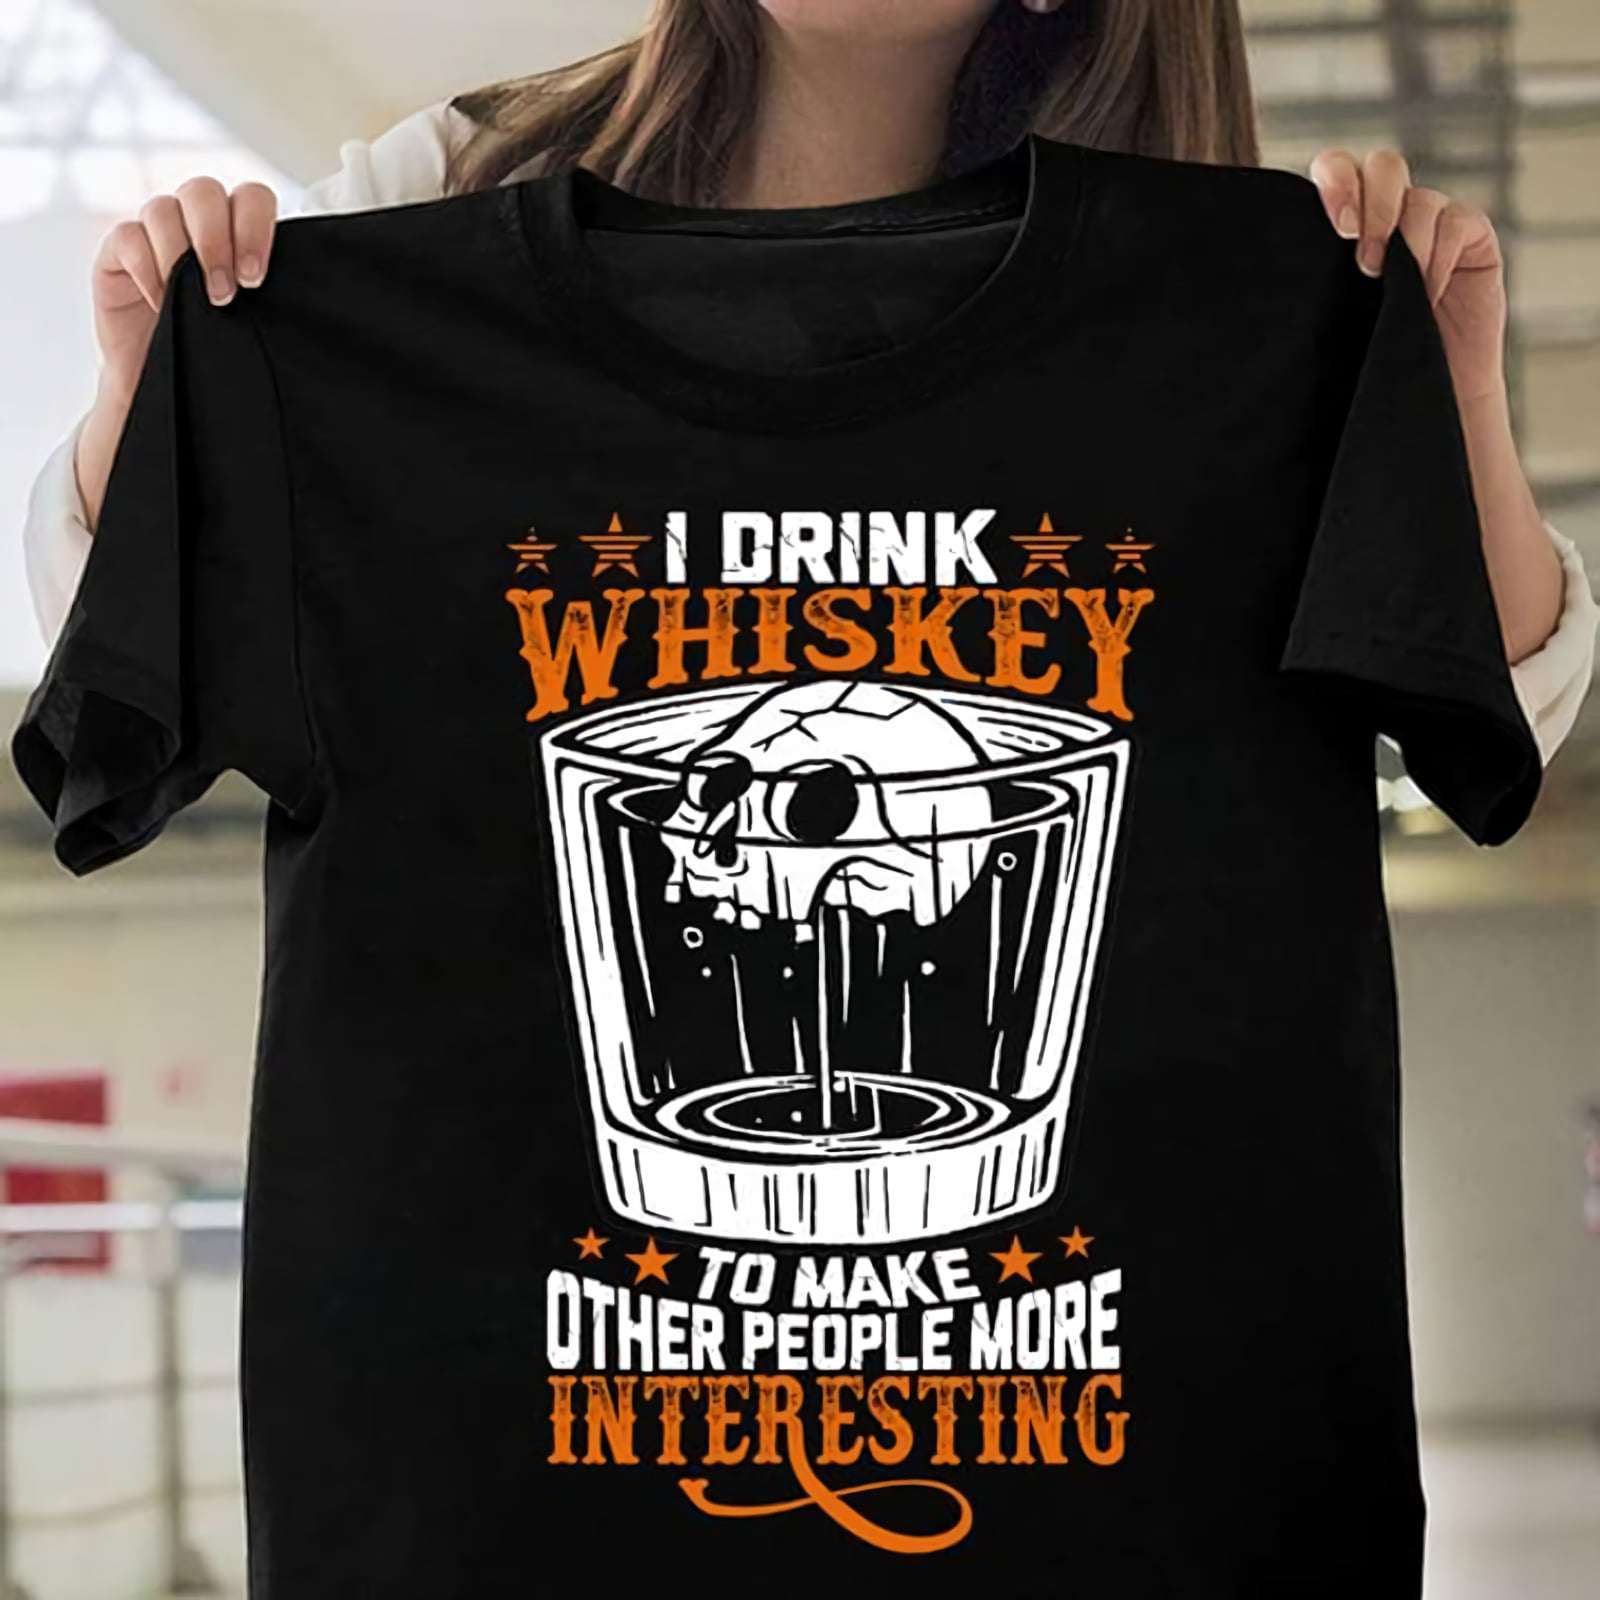 I drink whiskey to make other people more interesting - Whiskey skull, Whiskey wine